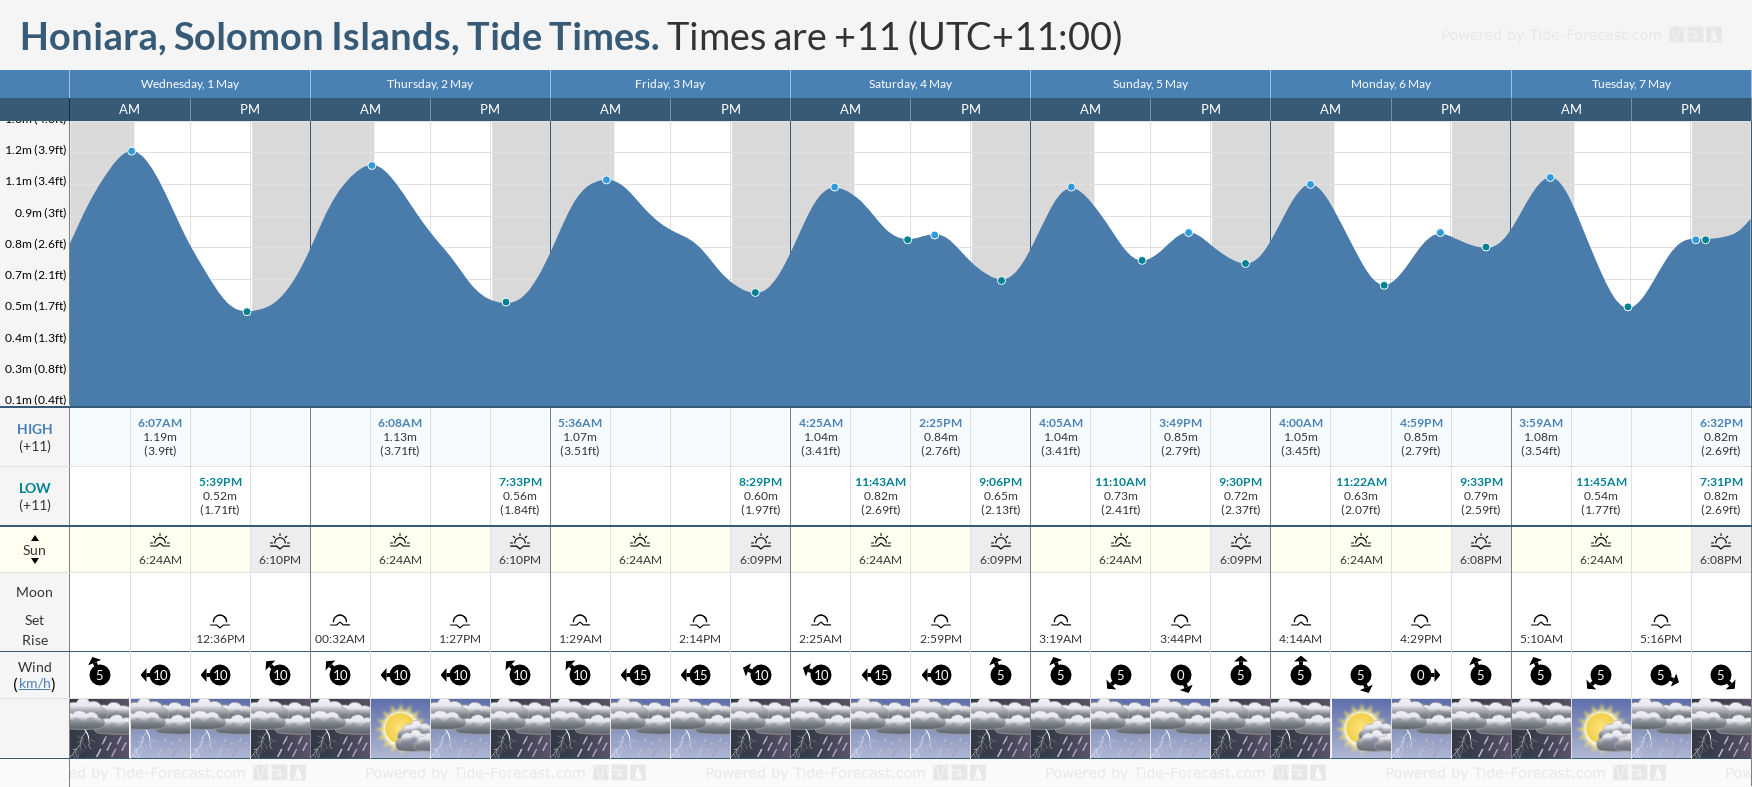 Honiara, Solomon Islands Tide Chart including high and low tide tide times for the next 7 days